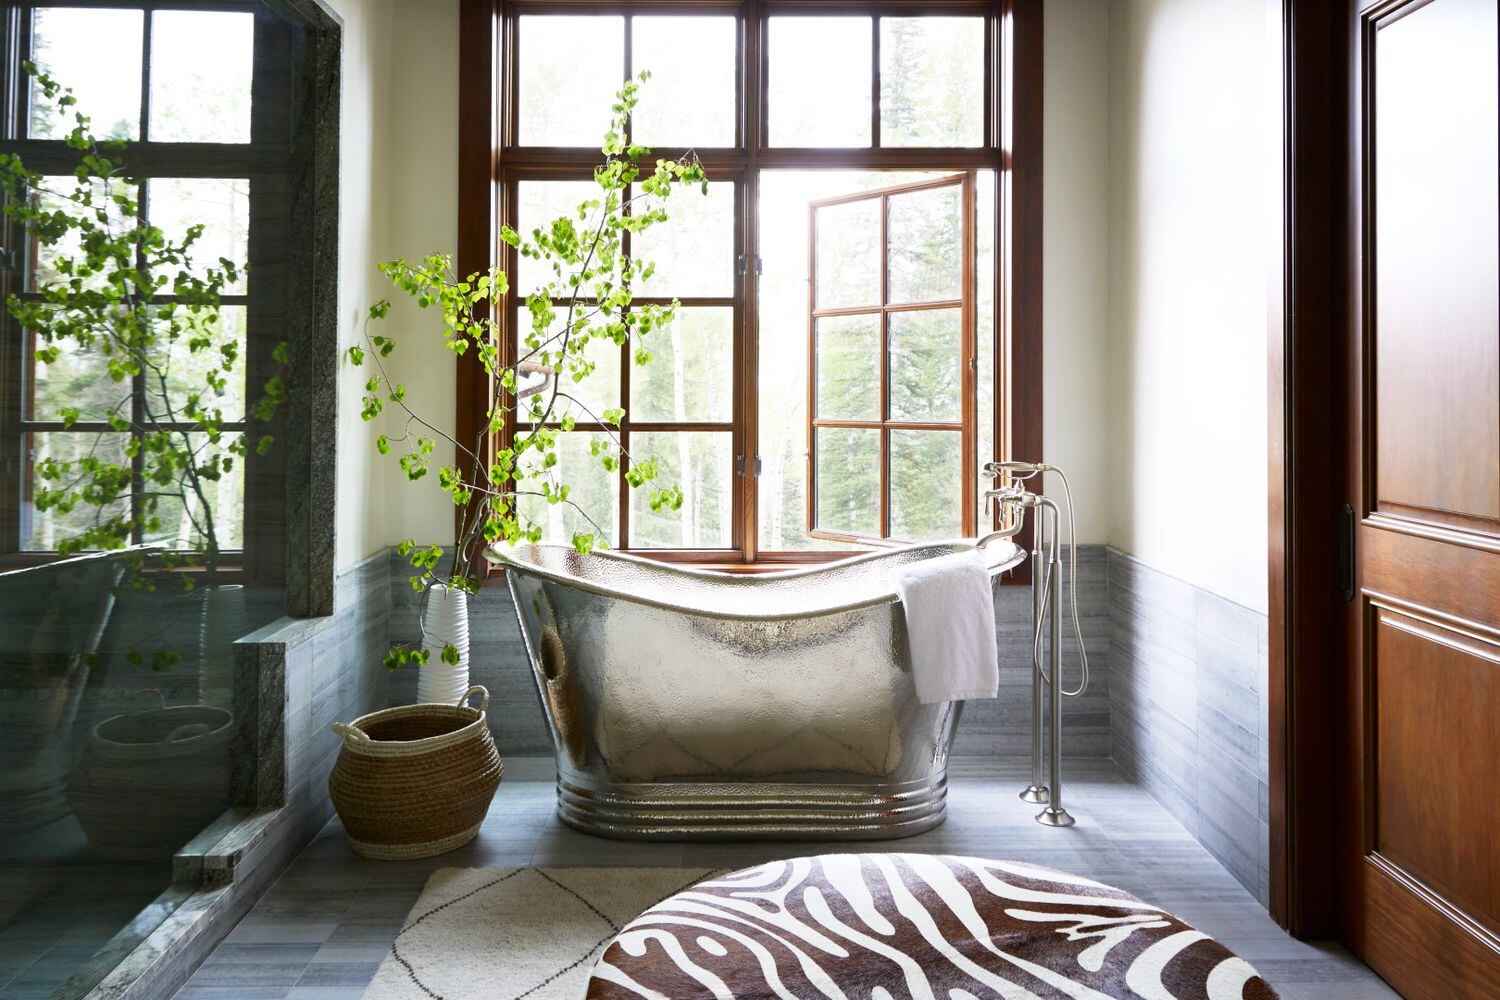 Primary bathroom with large windows, silver freestanding tub and an animal-print ottoman